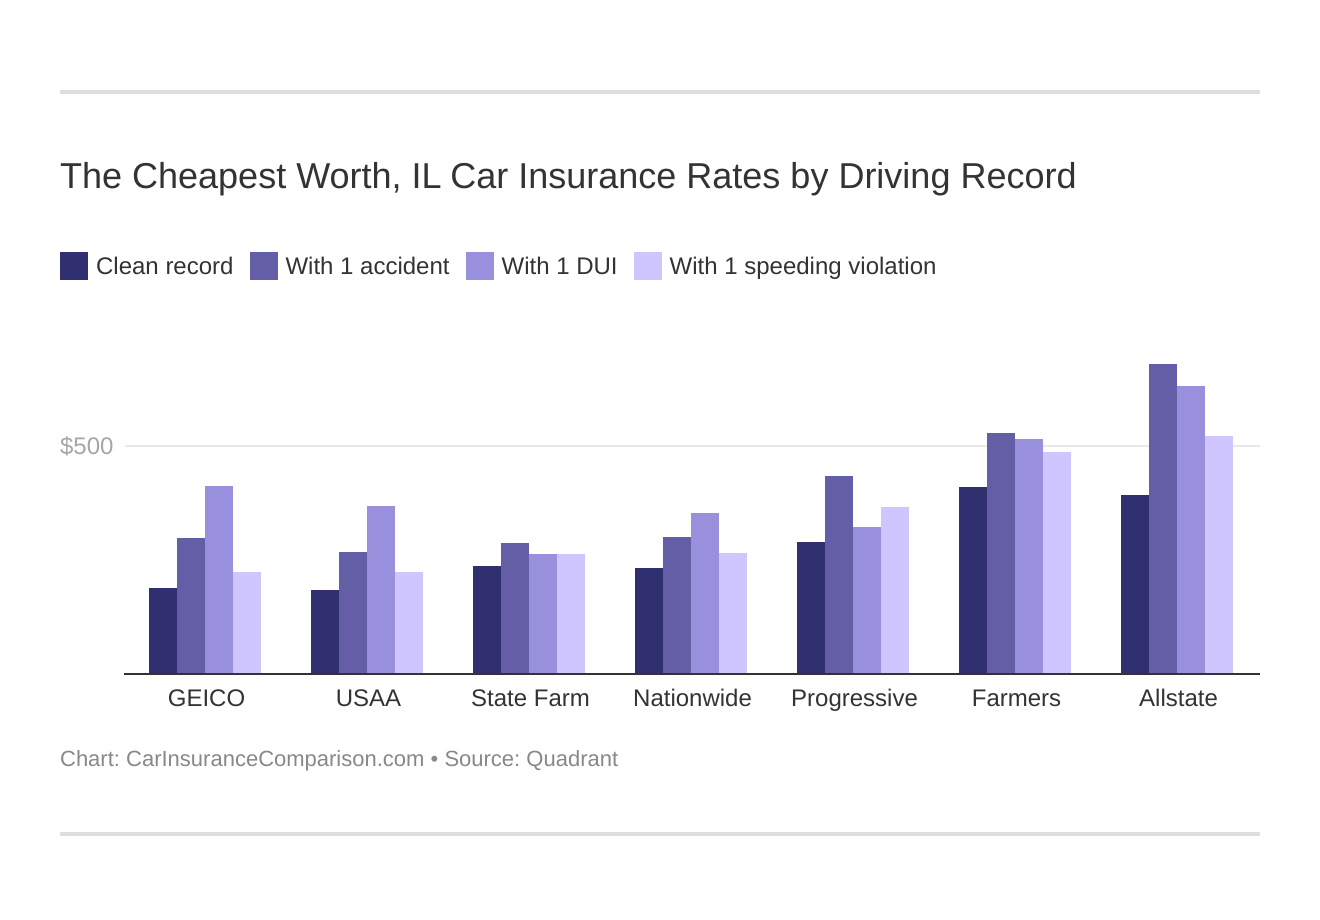 The Cheapest Worth, IL Car Insurance Rates by Driving Record